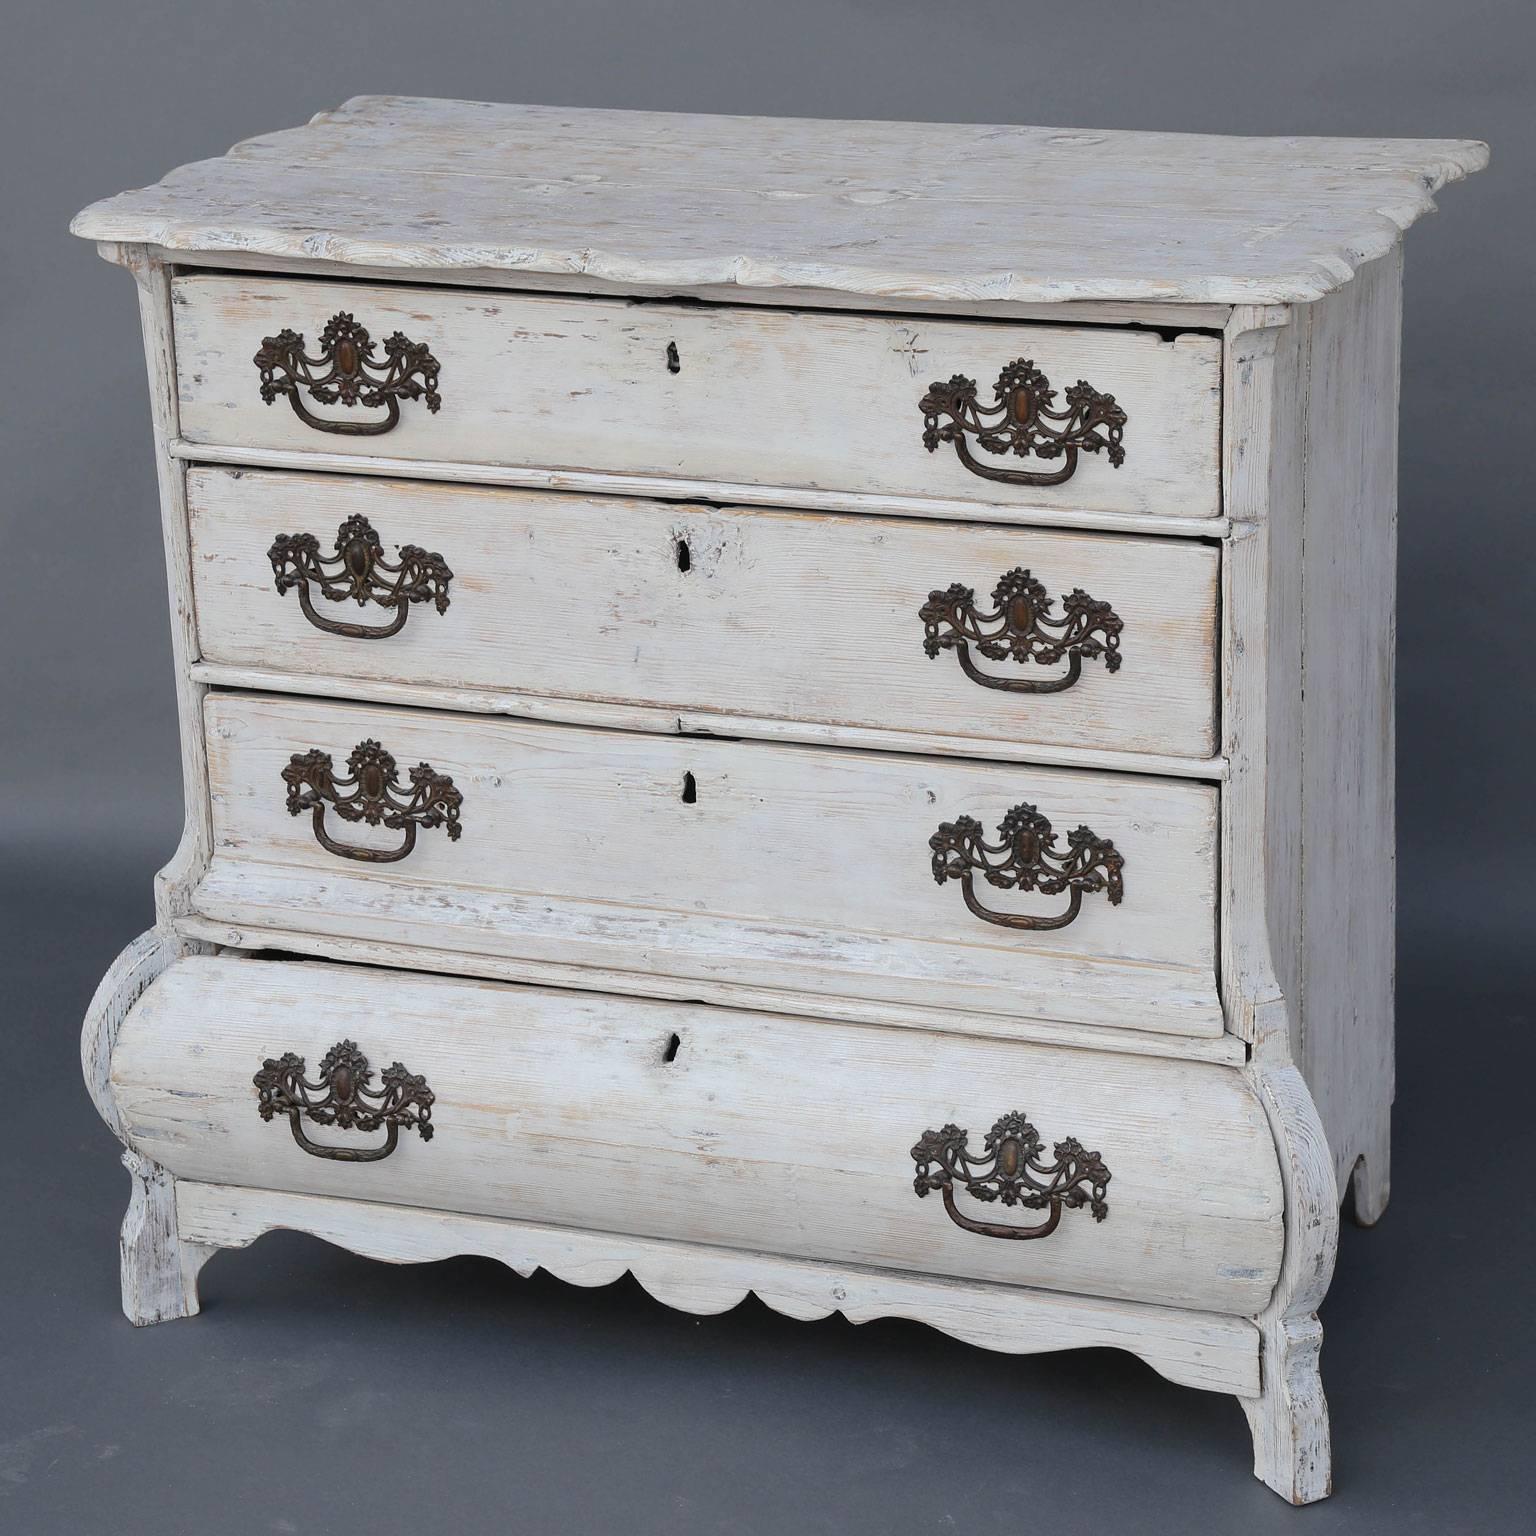 Early 19th century Bombé style painted commode with four drawers and brass hardware.